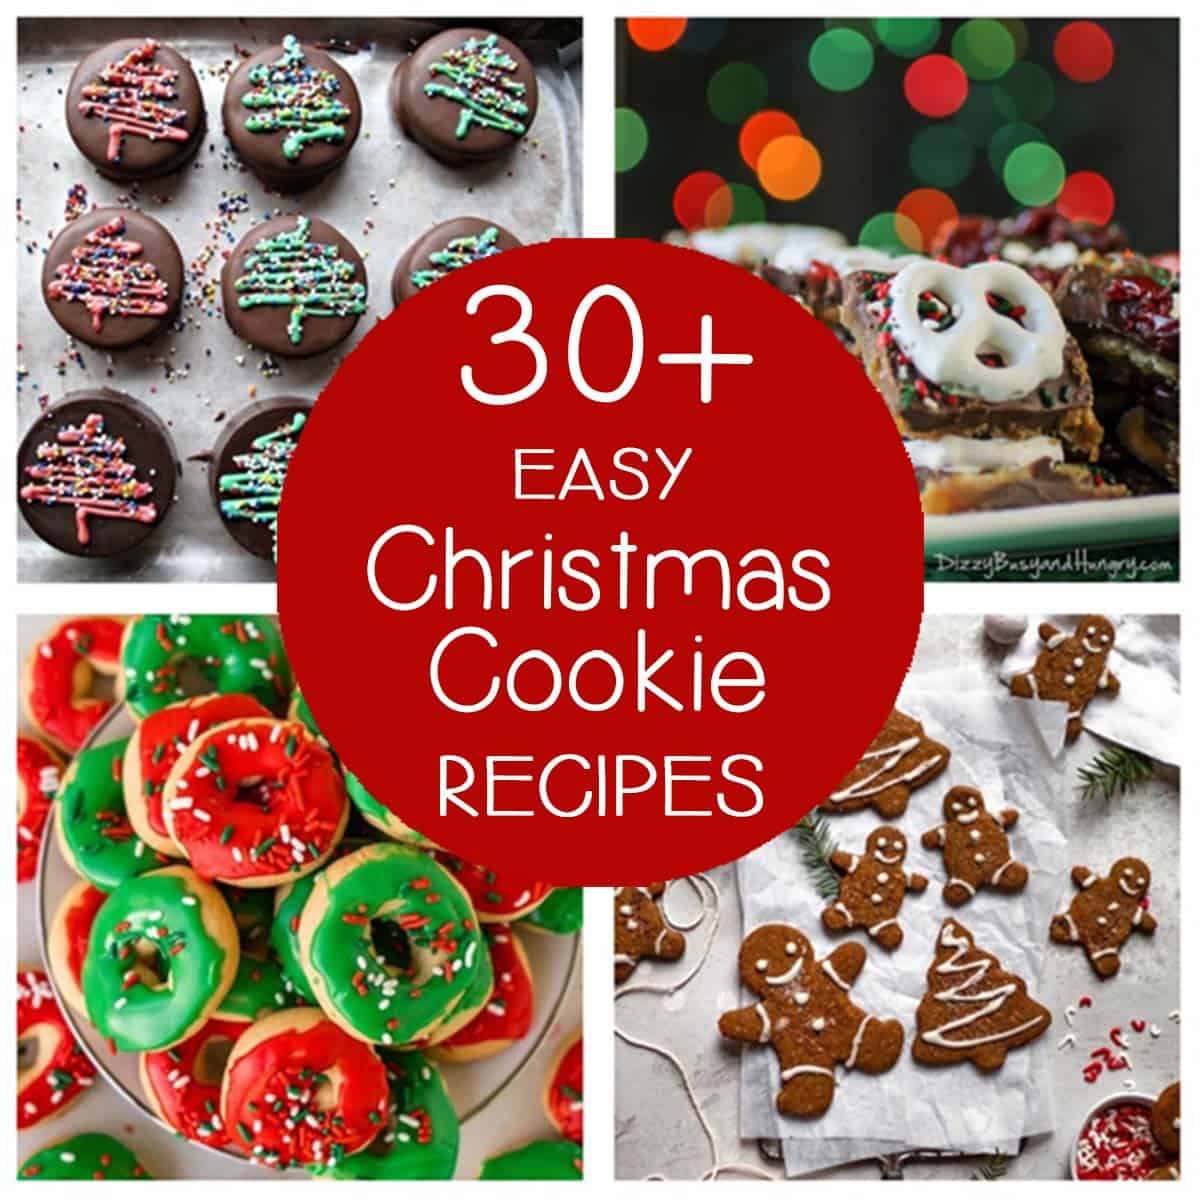 Collage of 4 different Christmas cookies with text overlay saying 30+ Easy Christmas Cookie Recipes.